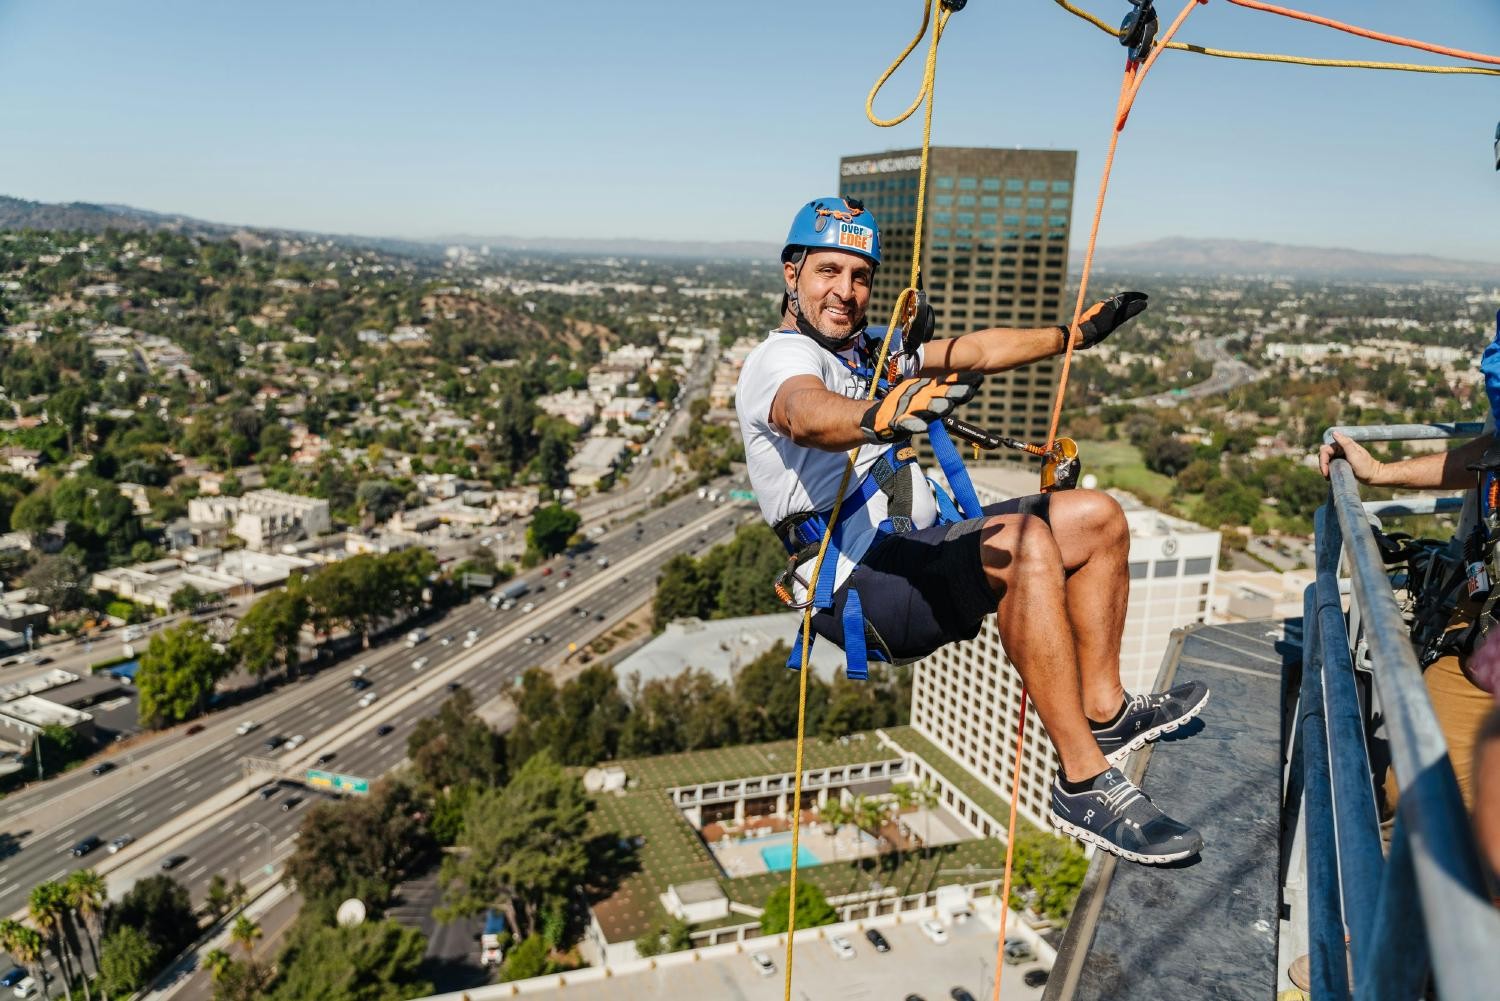 CEO Mauricio Umansky repelling off a building for charity event